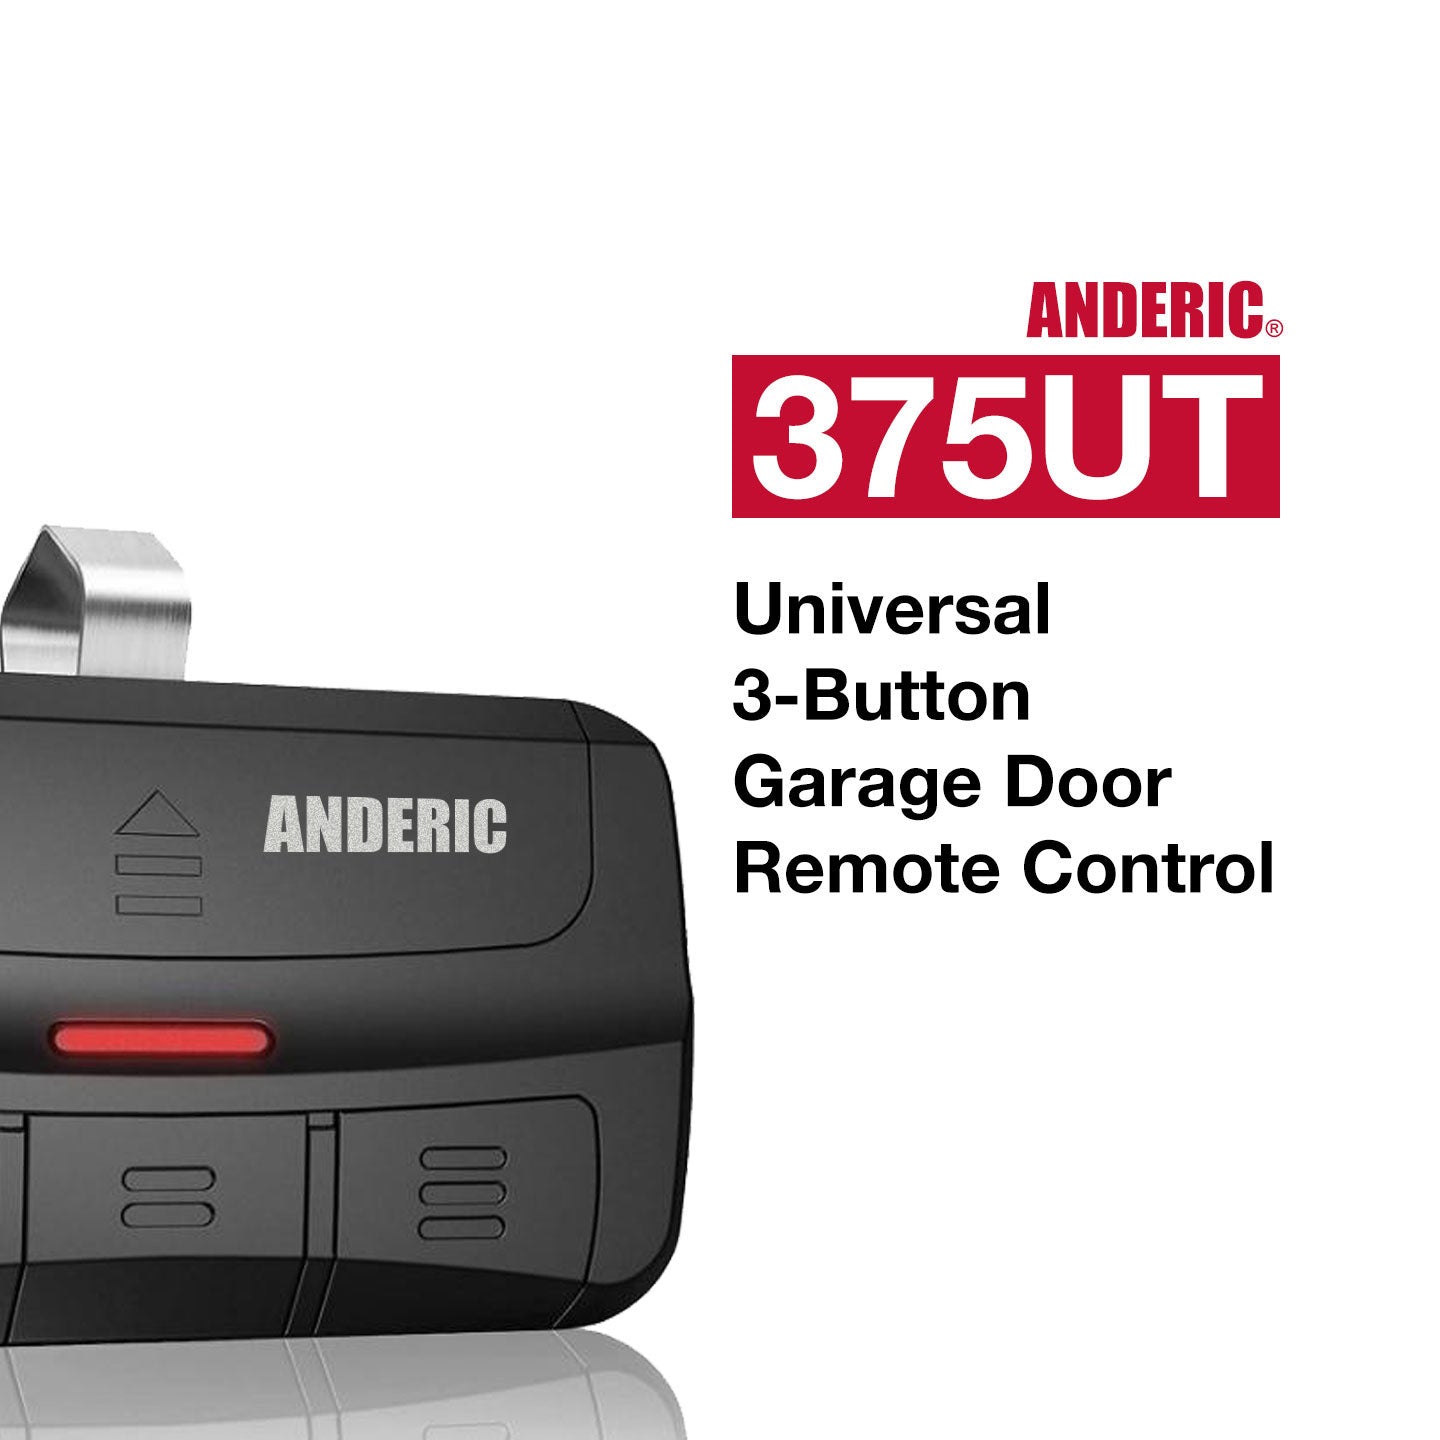 375UT Universal 3-Button Garage Door Opener Remote Control for LiftMaster® Chamberlain® Genie® Craftsman® and More